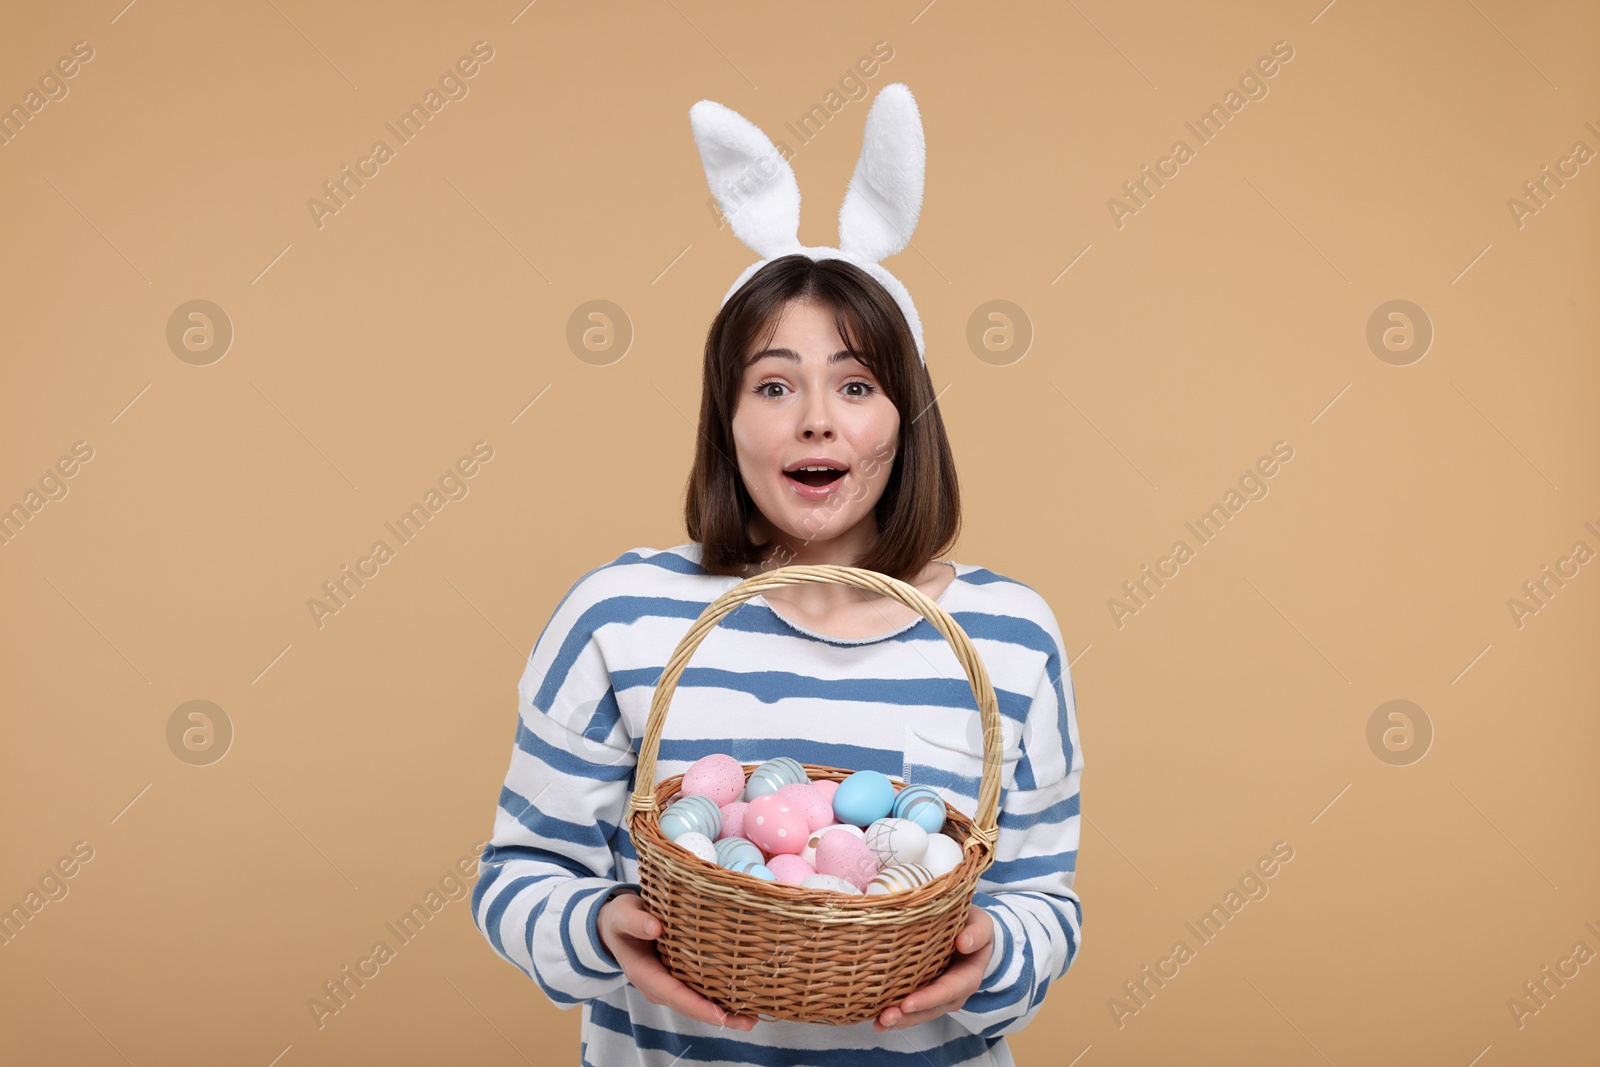 Photo of Easter celebration. Surprised woman with bunny ears and wicker basket full of painted eggs on beige background